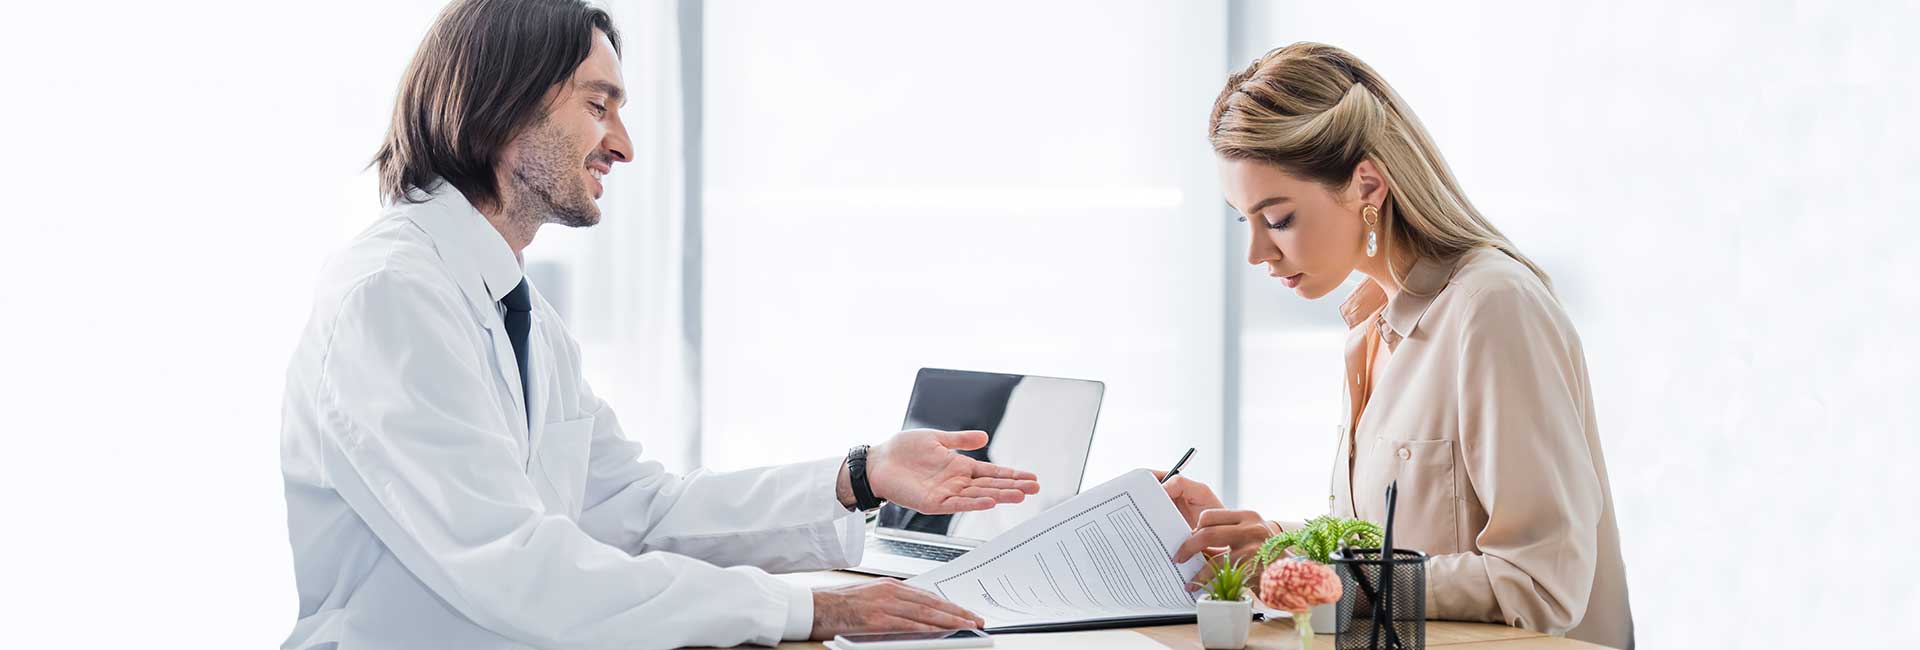 Woman signing insurance claim form during appointment